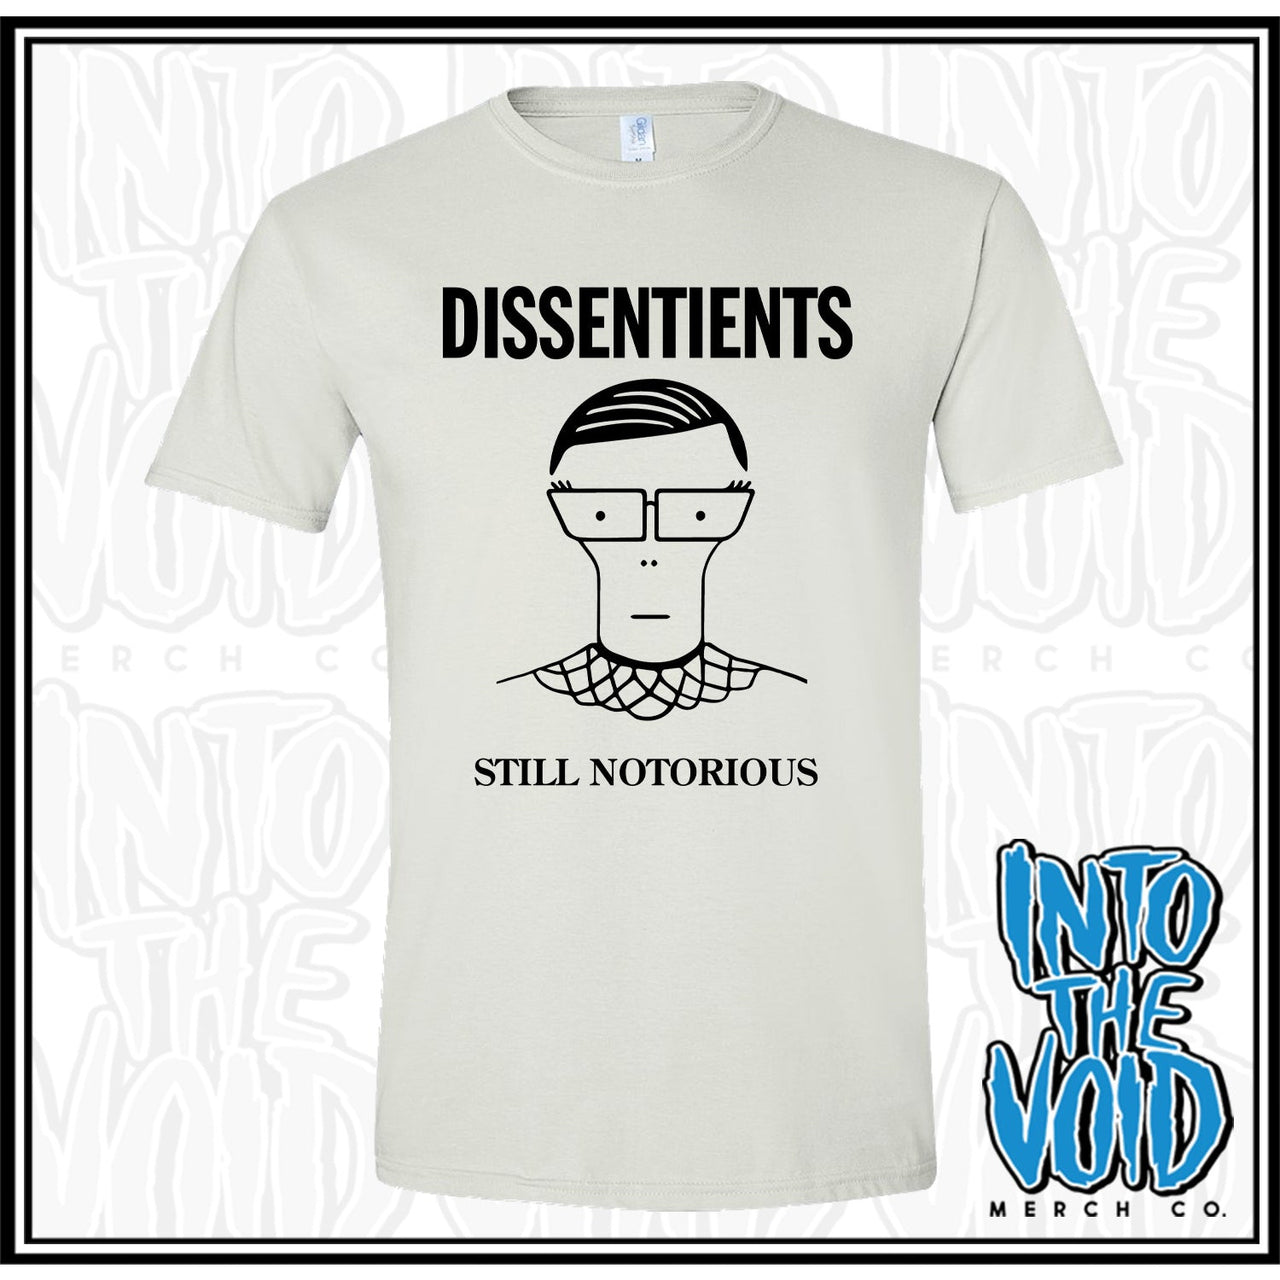 DISSENTIENTS - Short Sleeve T-Shirt - INTO THE VOID Merch Co.